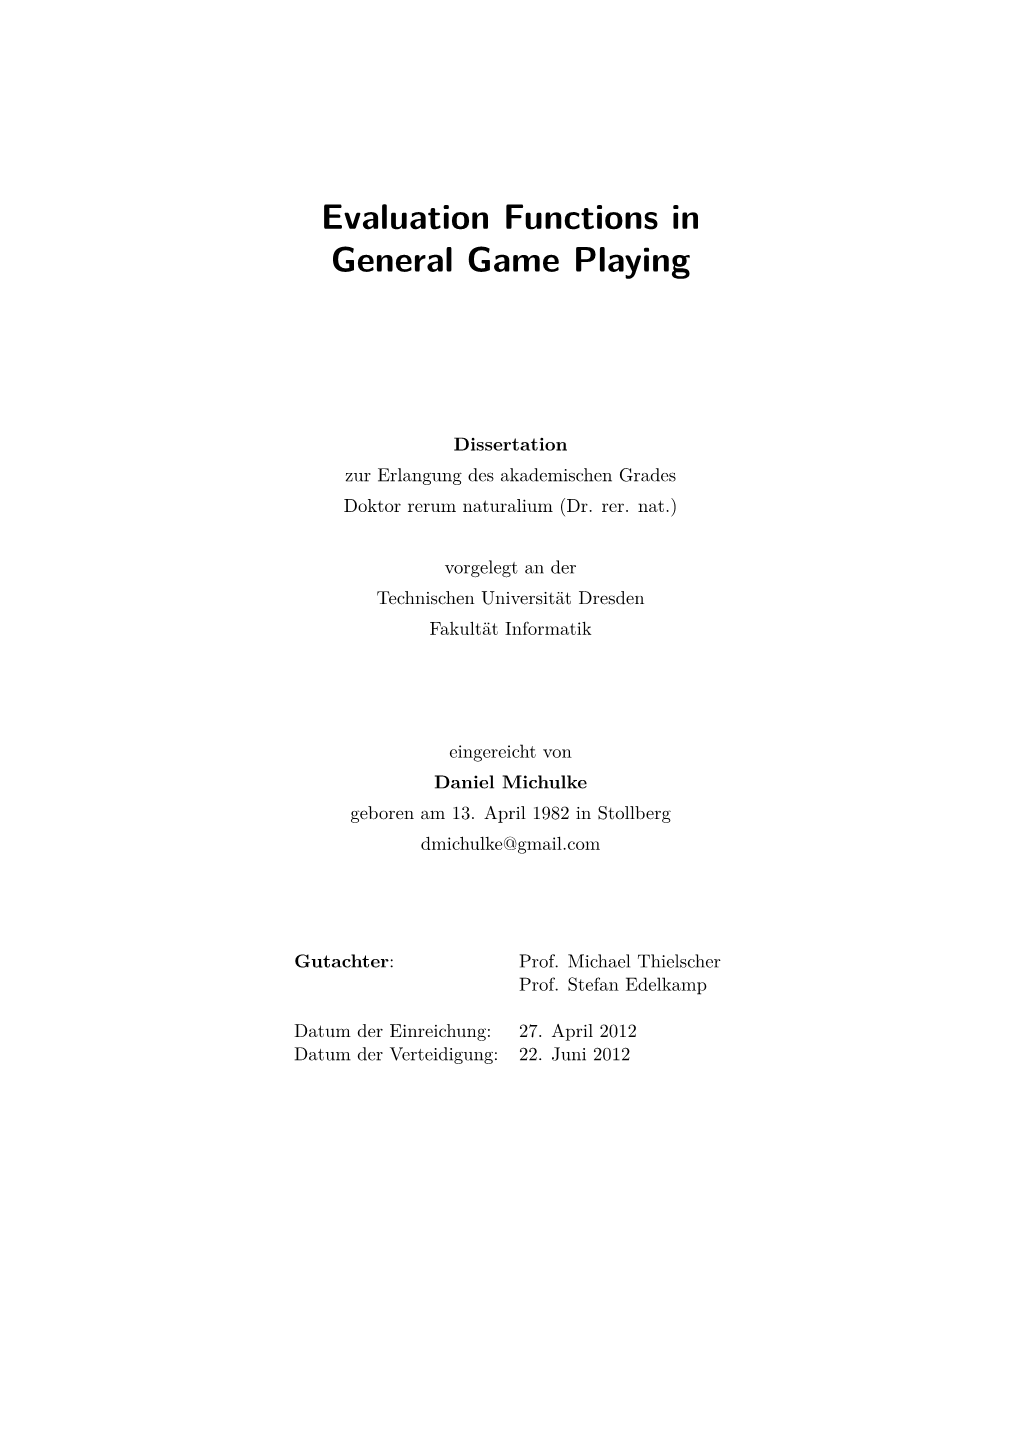 Evaluation Functions in General Game Playing